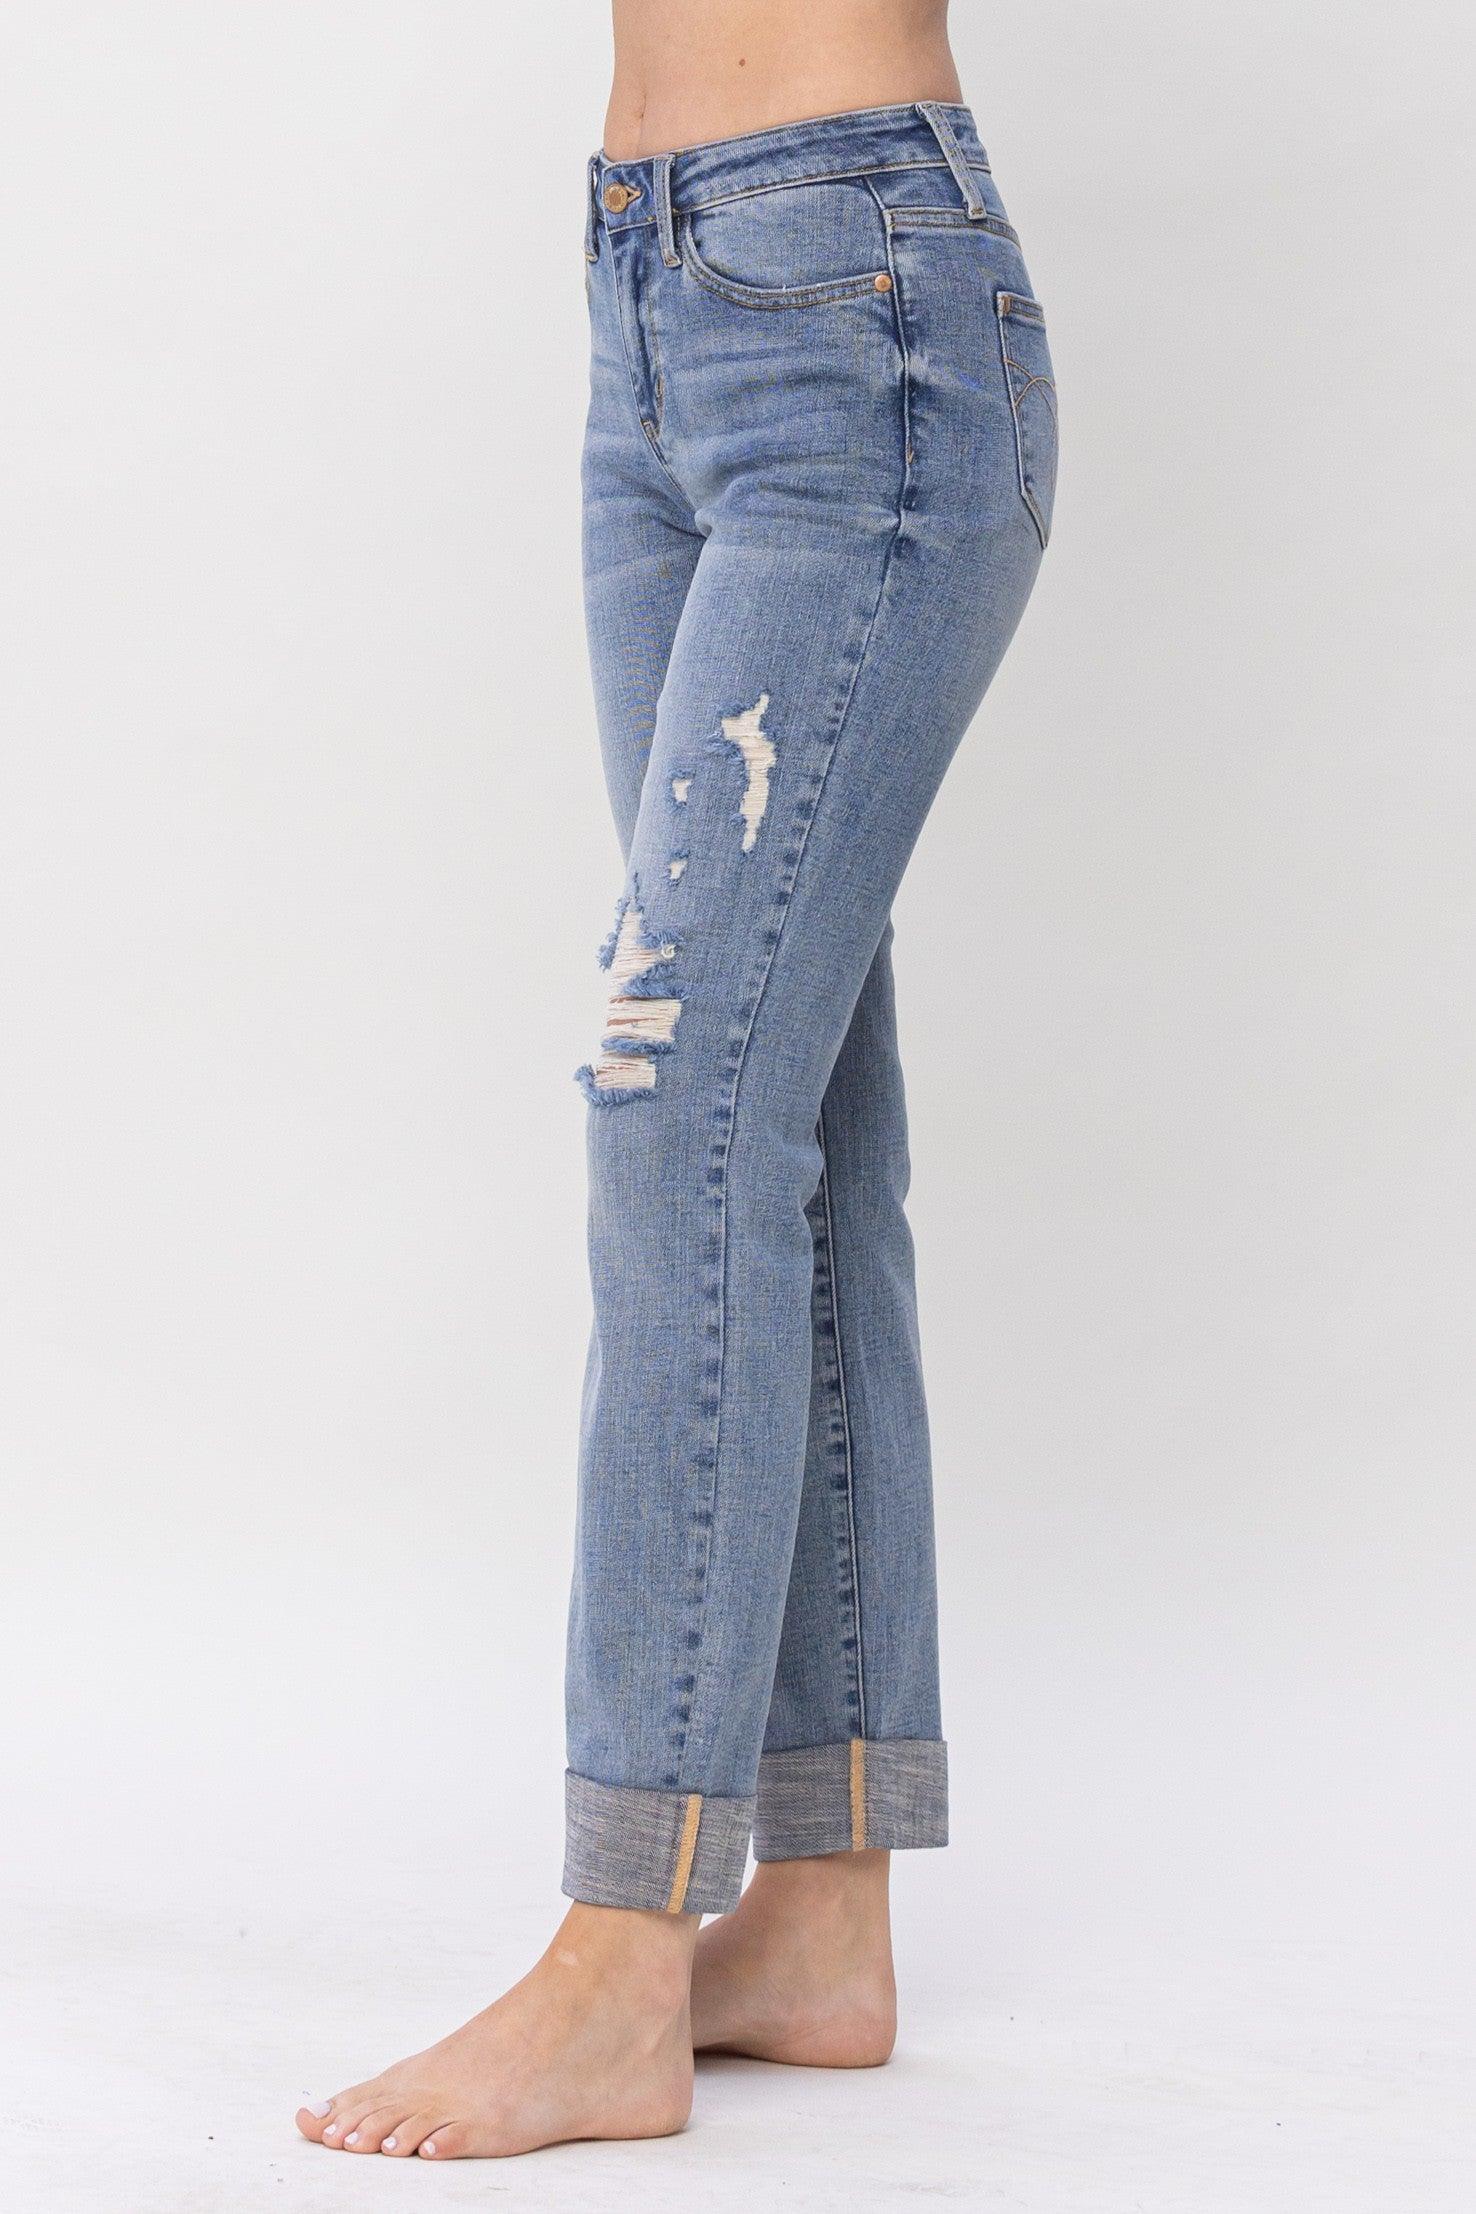 Judy Blue Midrise with Knee Destroy and Cuffed Long Boyfriend Jeans - Doodlations Coffee Bar & Boutique